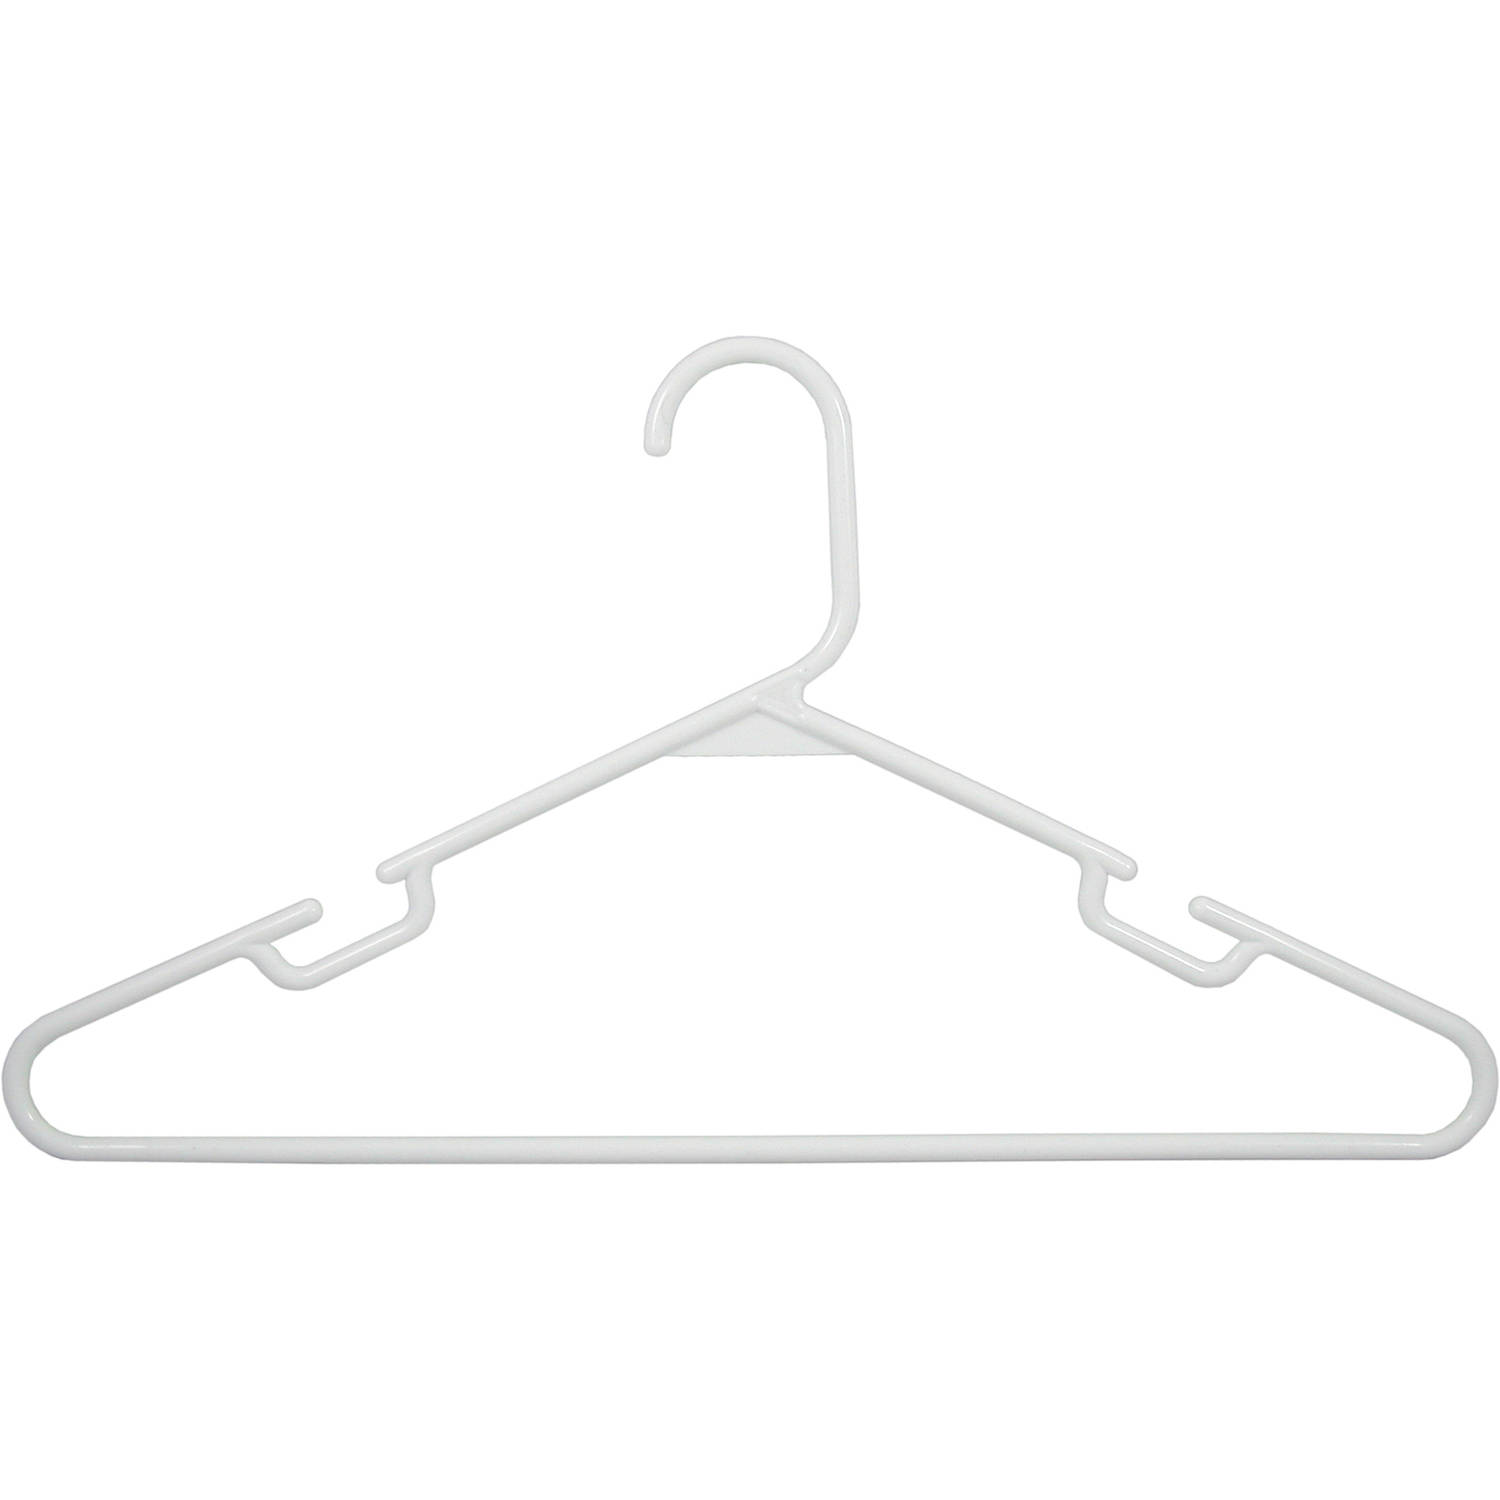 WHITE PLASTIC HANGERS FOR CHILDREN//ADULT CLOTHING-CLOSET ORGANIZERS-PRE OWNED